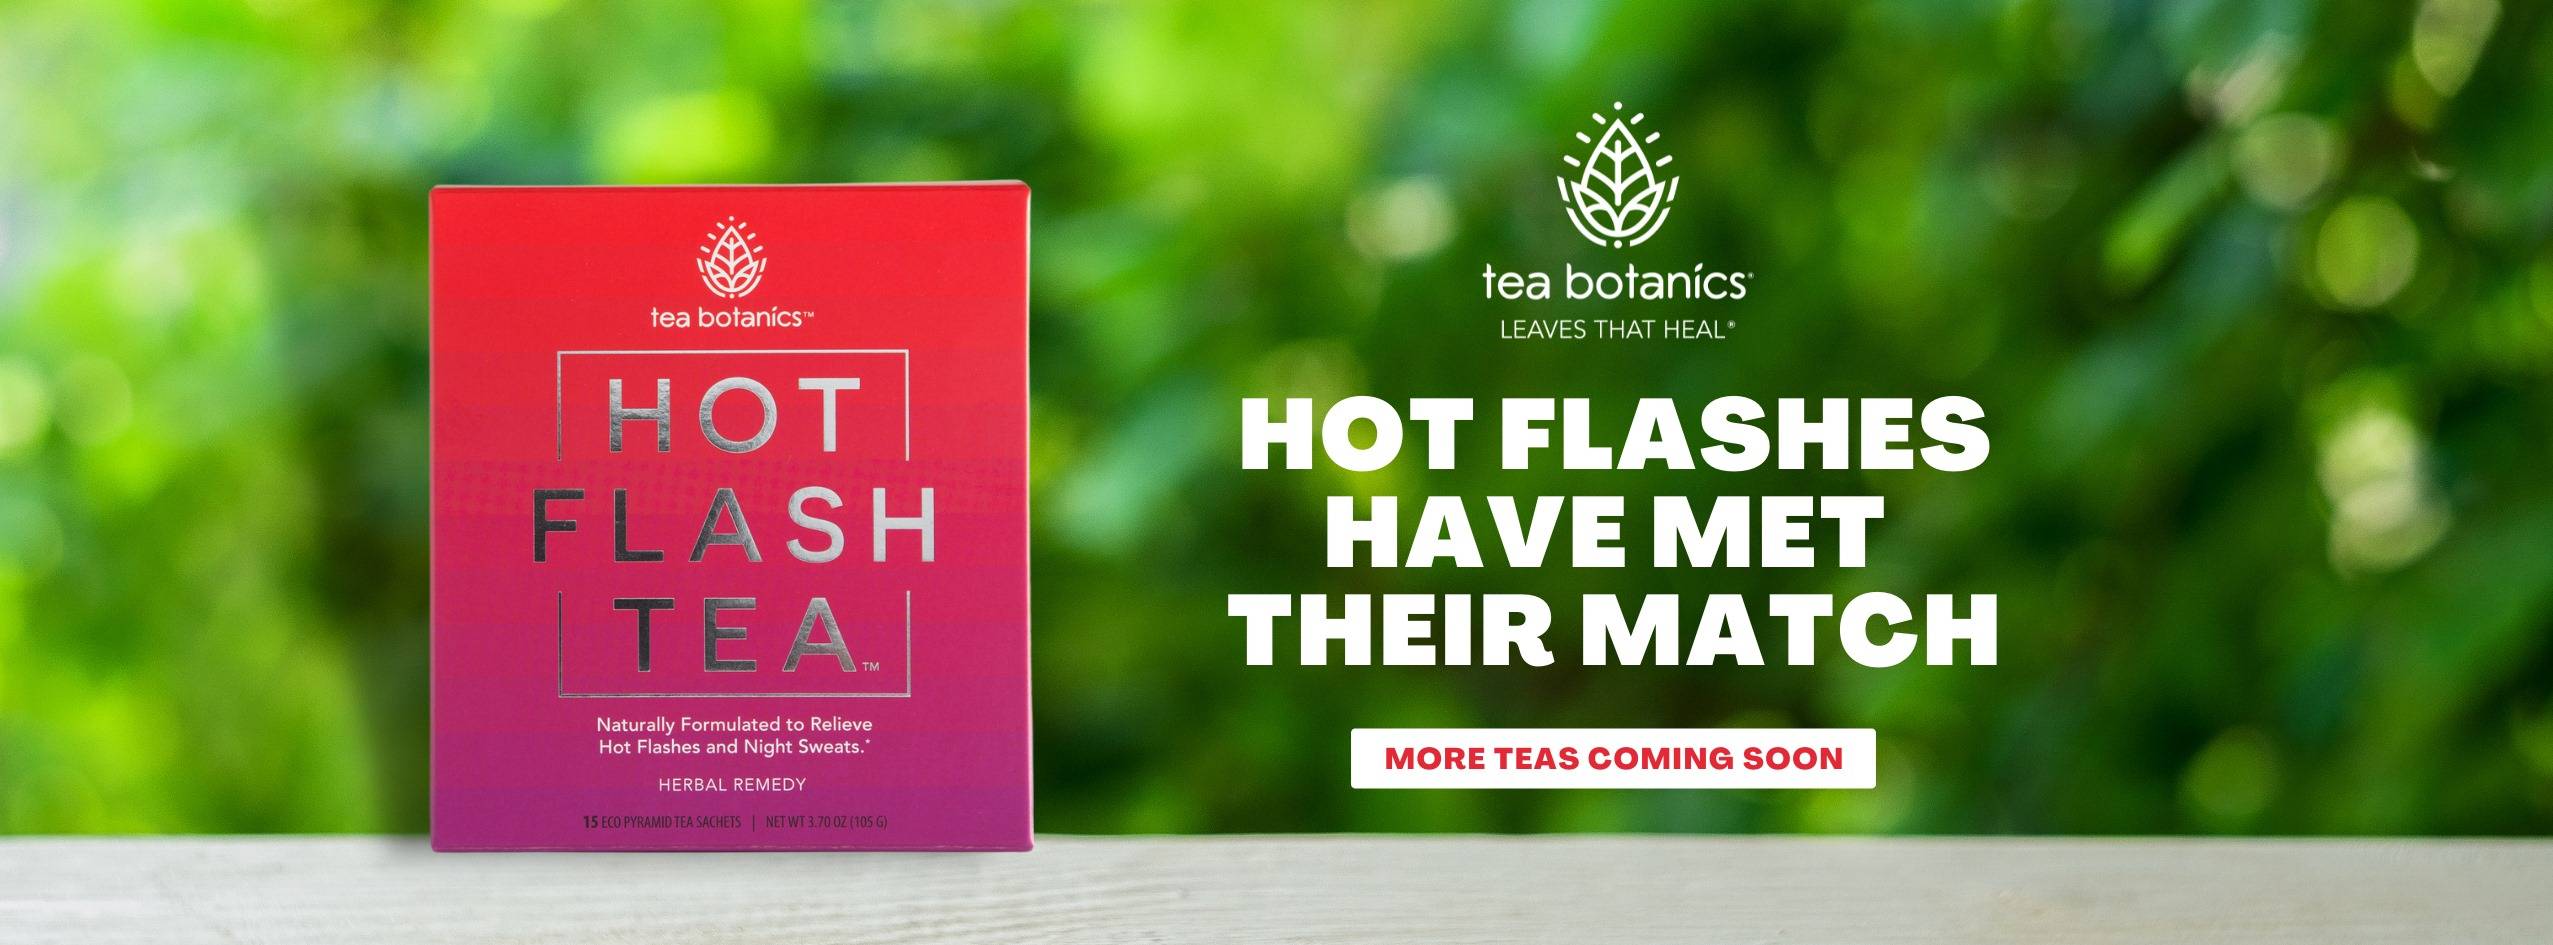 Hot Flash Tea Banner that says "Hot Flashes have met their match"